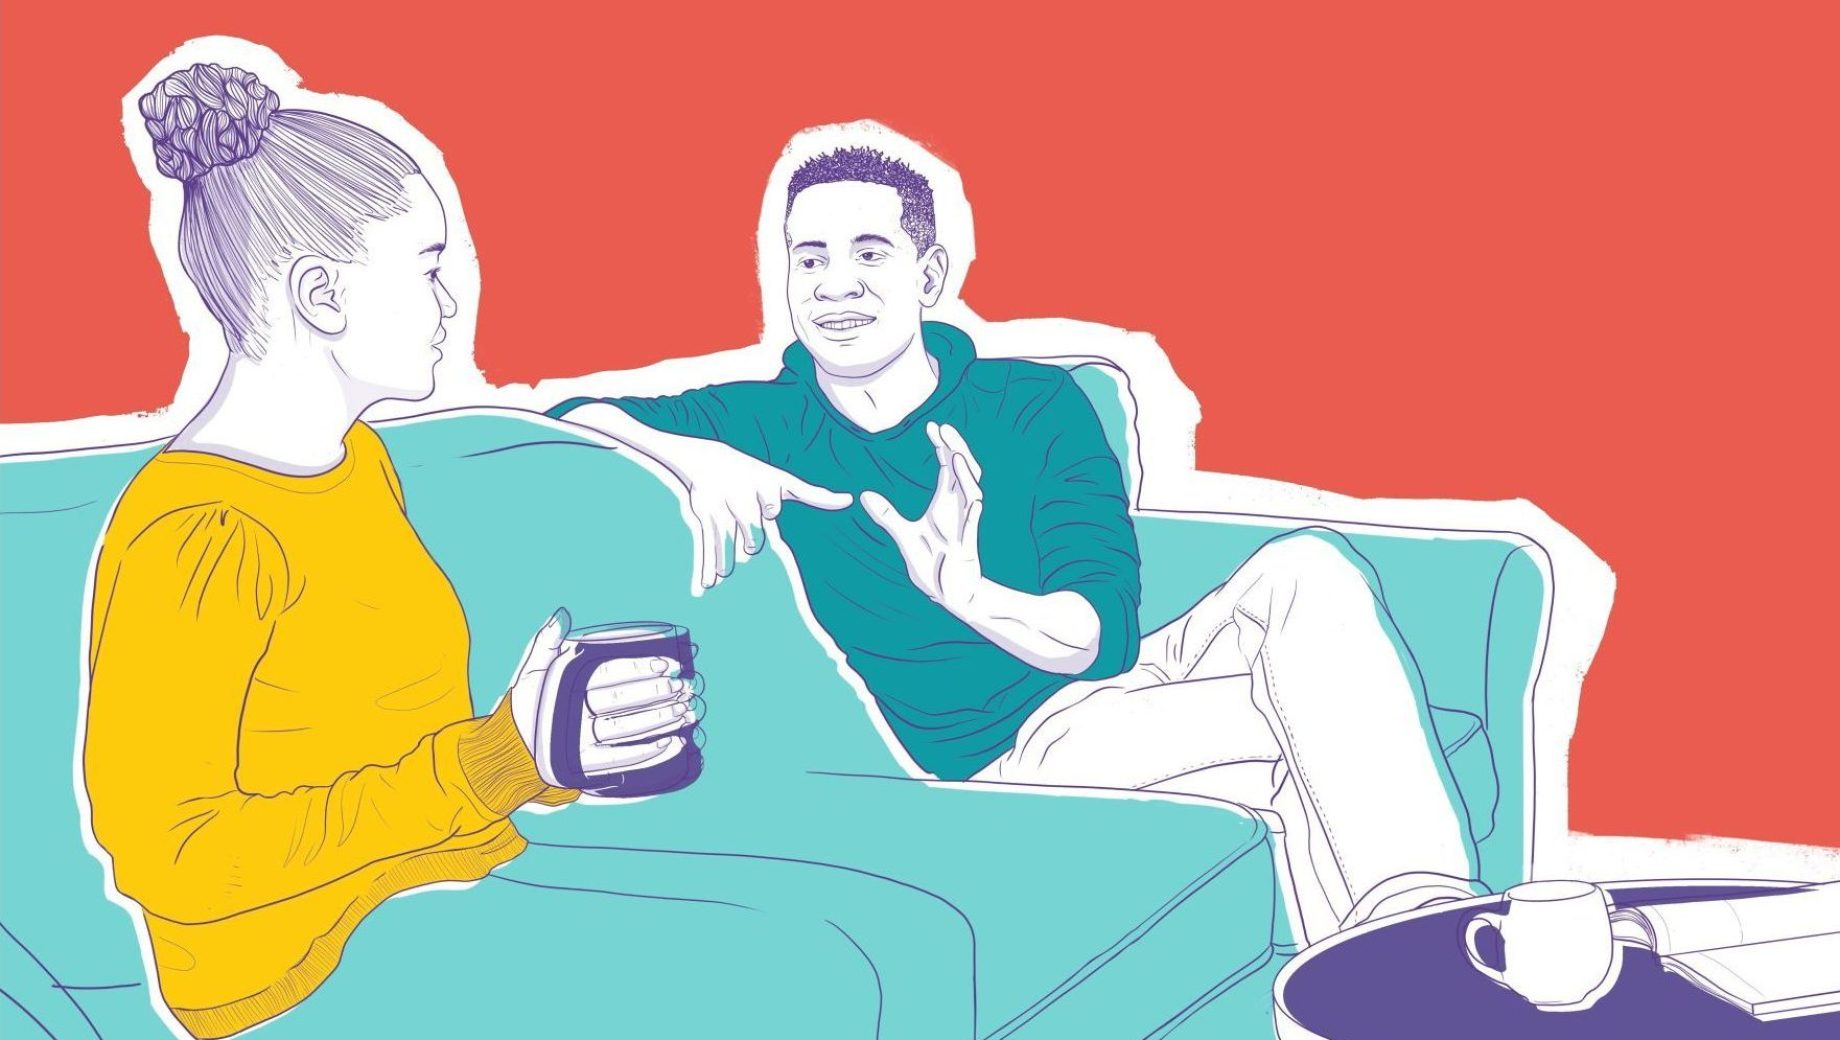 Illustration of a man and woman sitting on a sofa talking